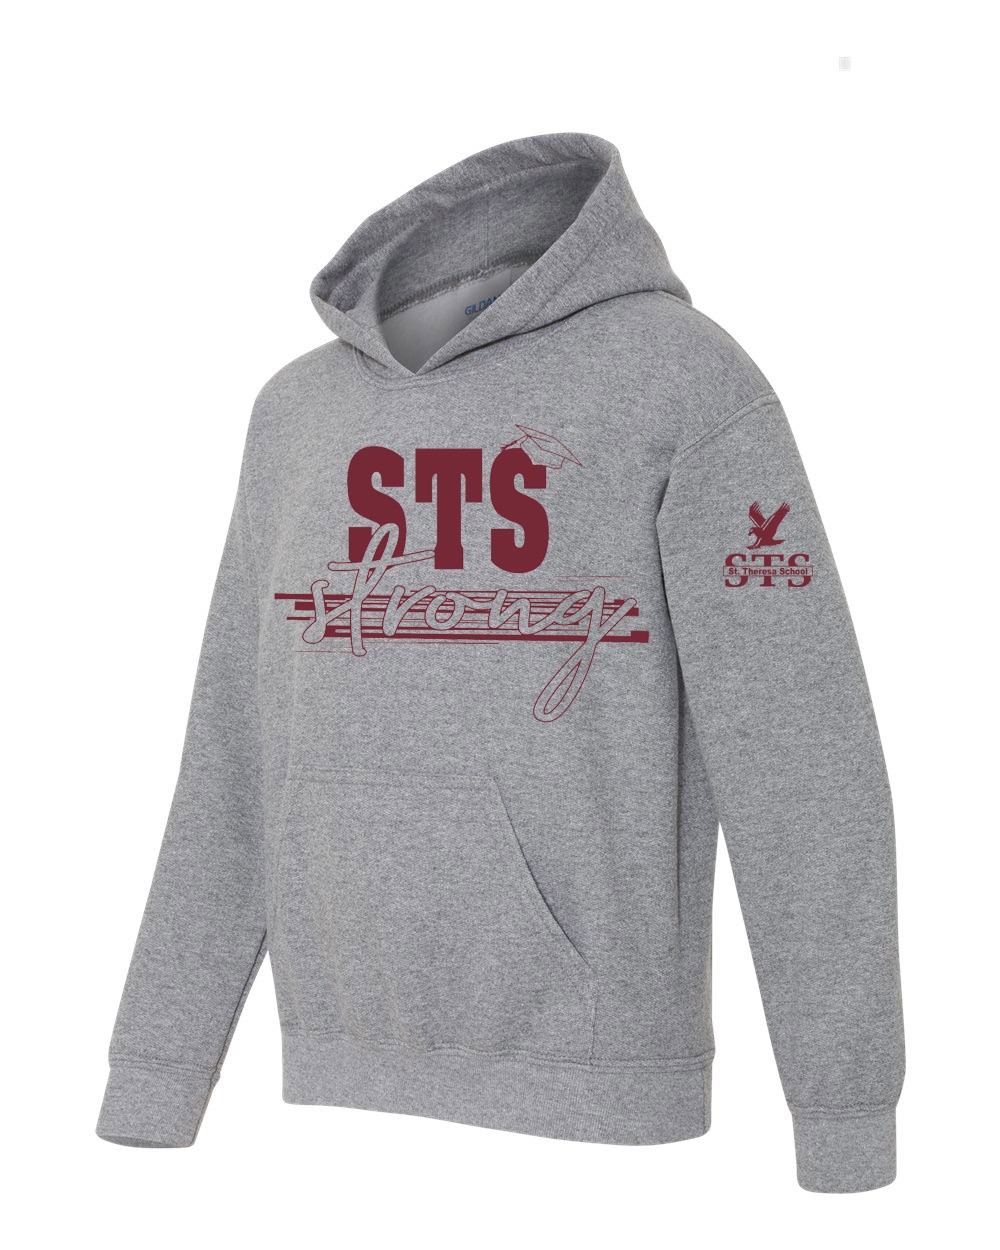 STS Staff Spirit Strong Pullover Hoodie w/ Maroon Logo - Please allow 2-3 Weeks for Delivery